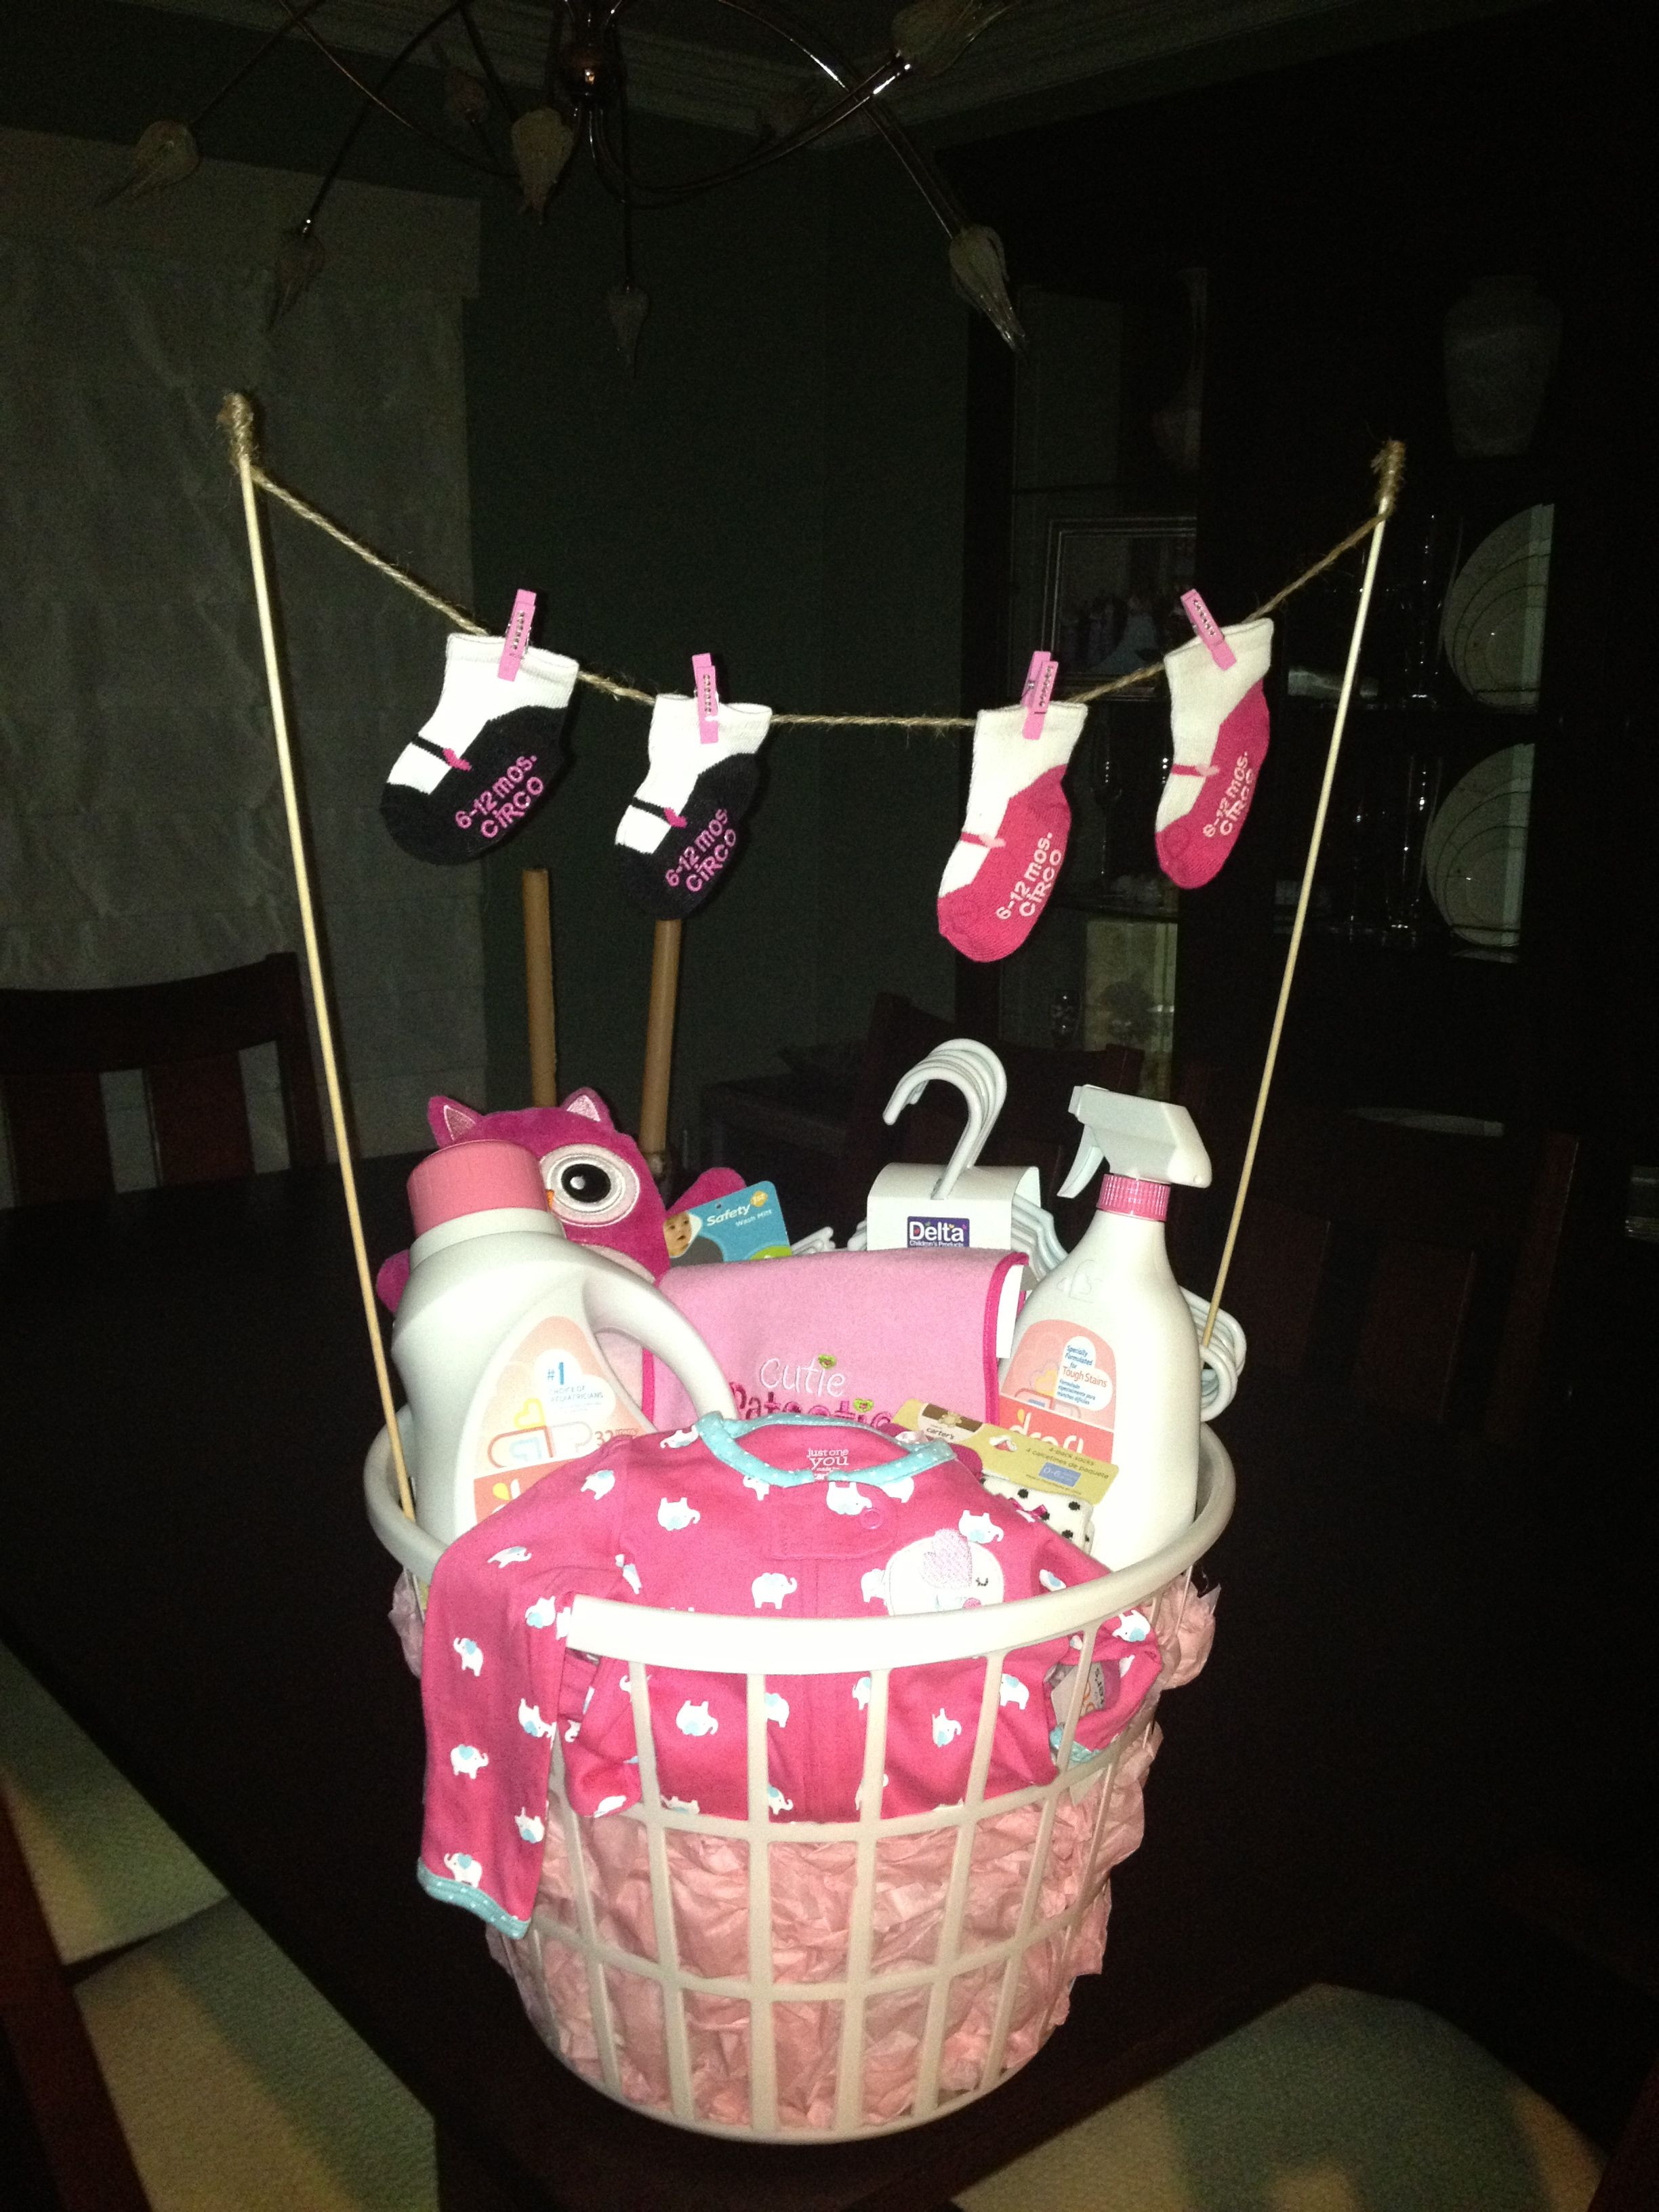 Gift Basket Ideas For Baby Shower
 Laundry basket baby shower t Baby Gifts